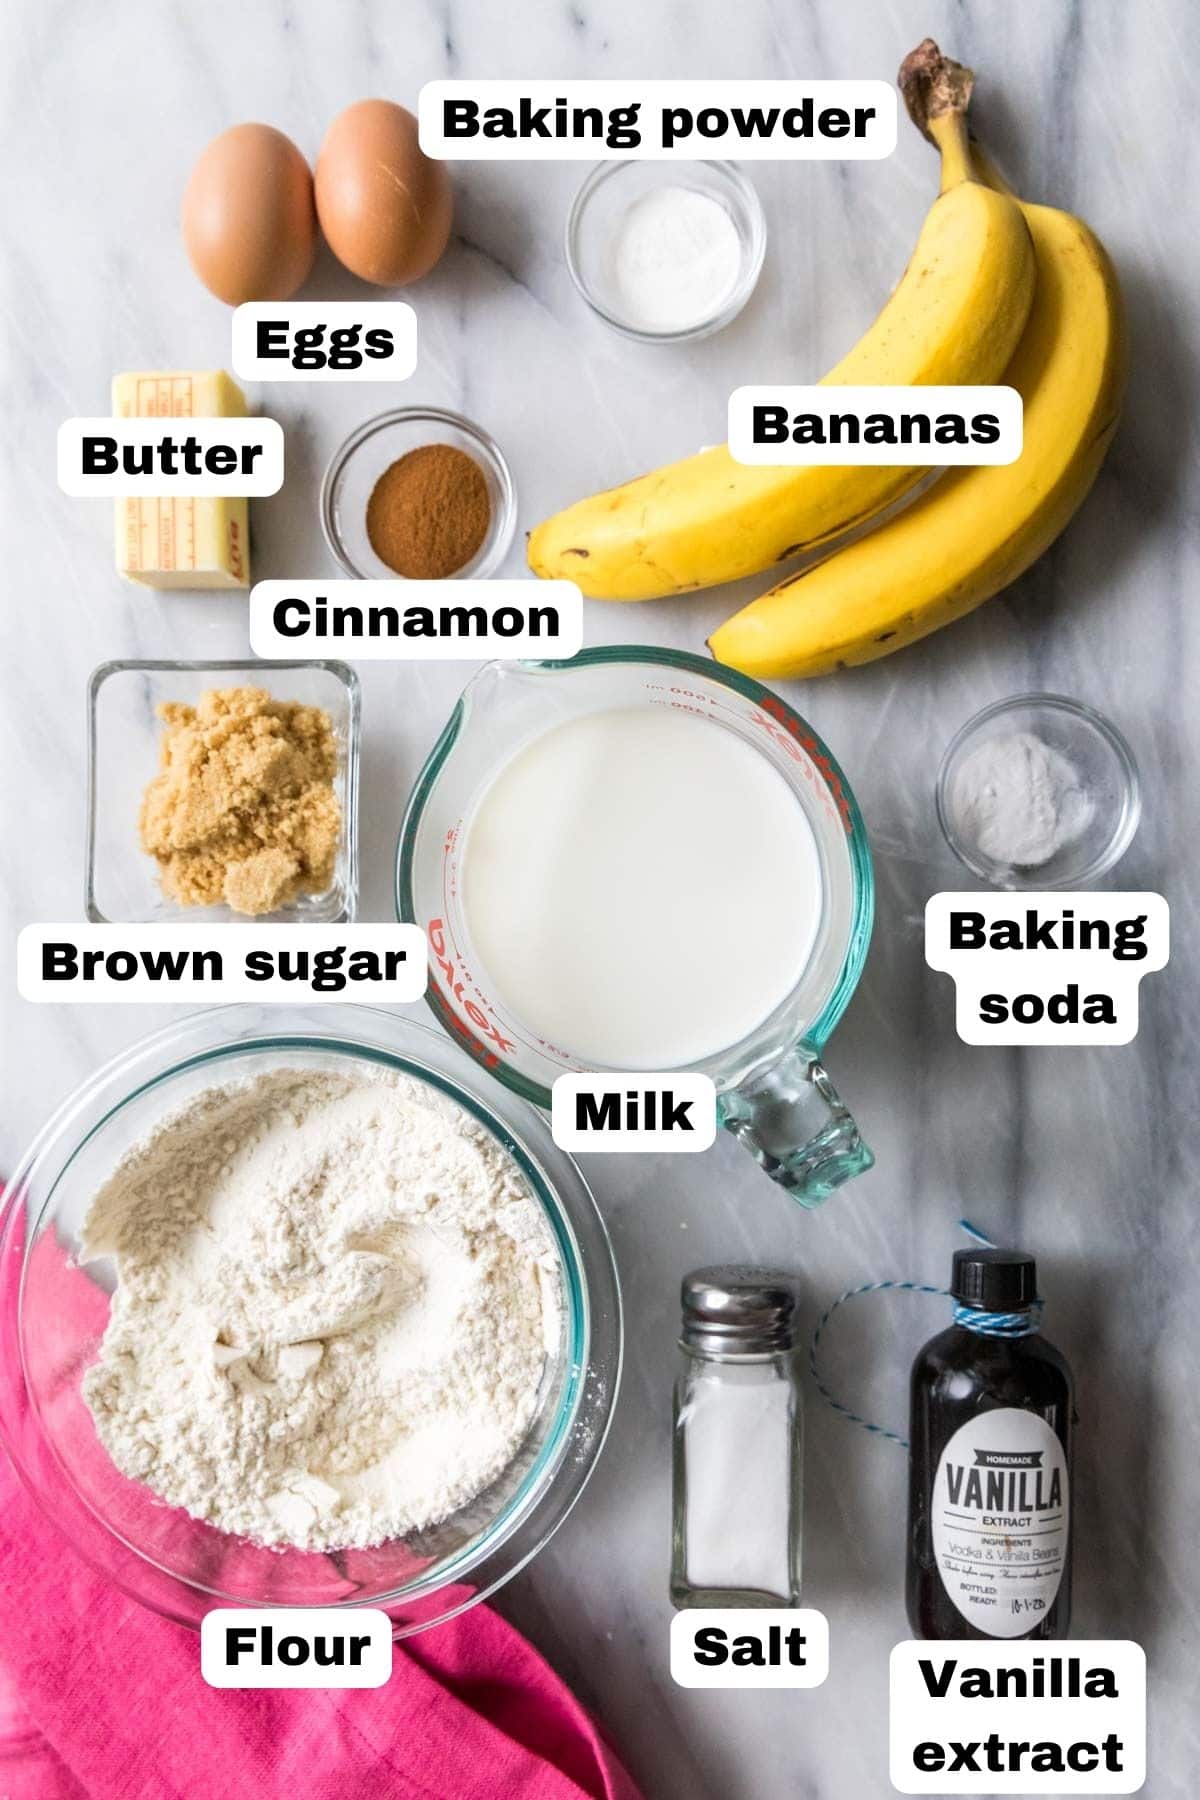 Overhead view of labelled ingredients including bananas, cinnamon, brown sugar, and more.